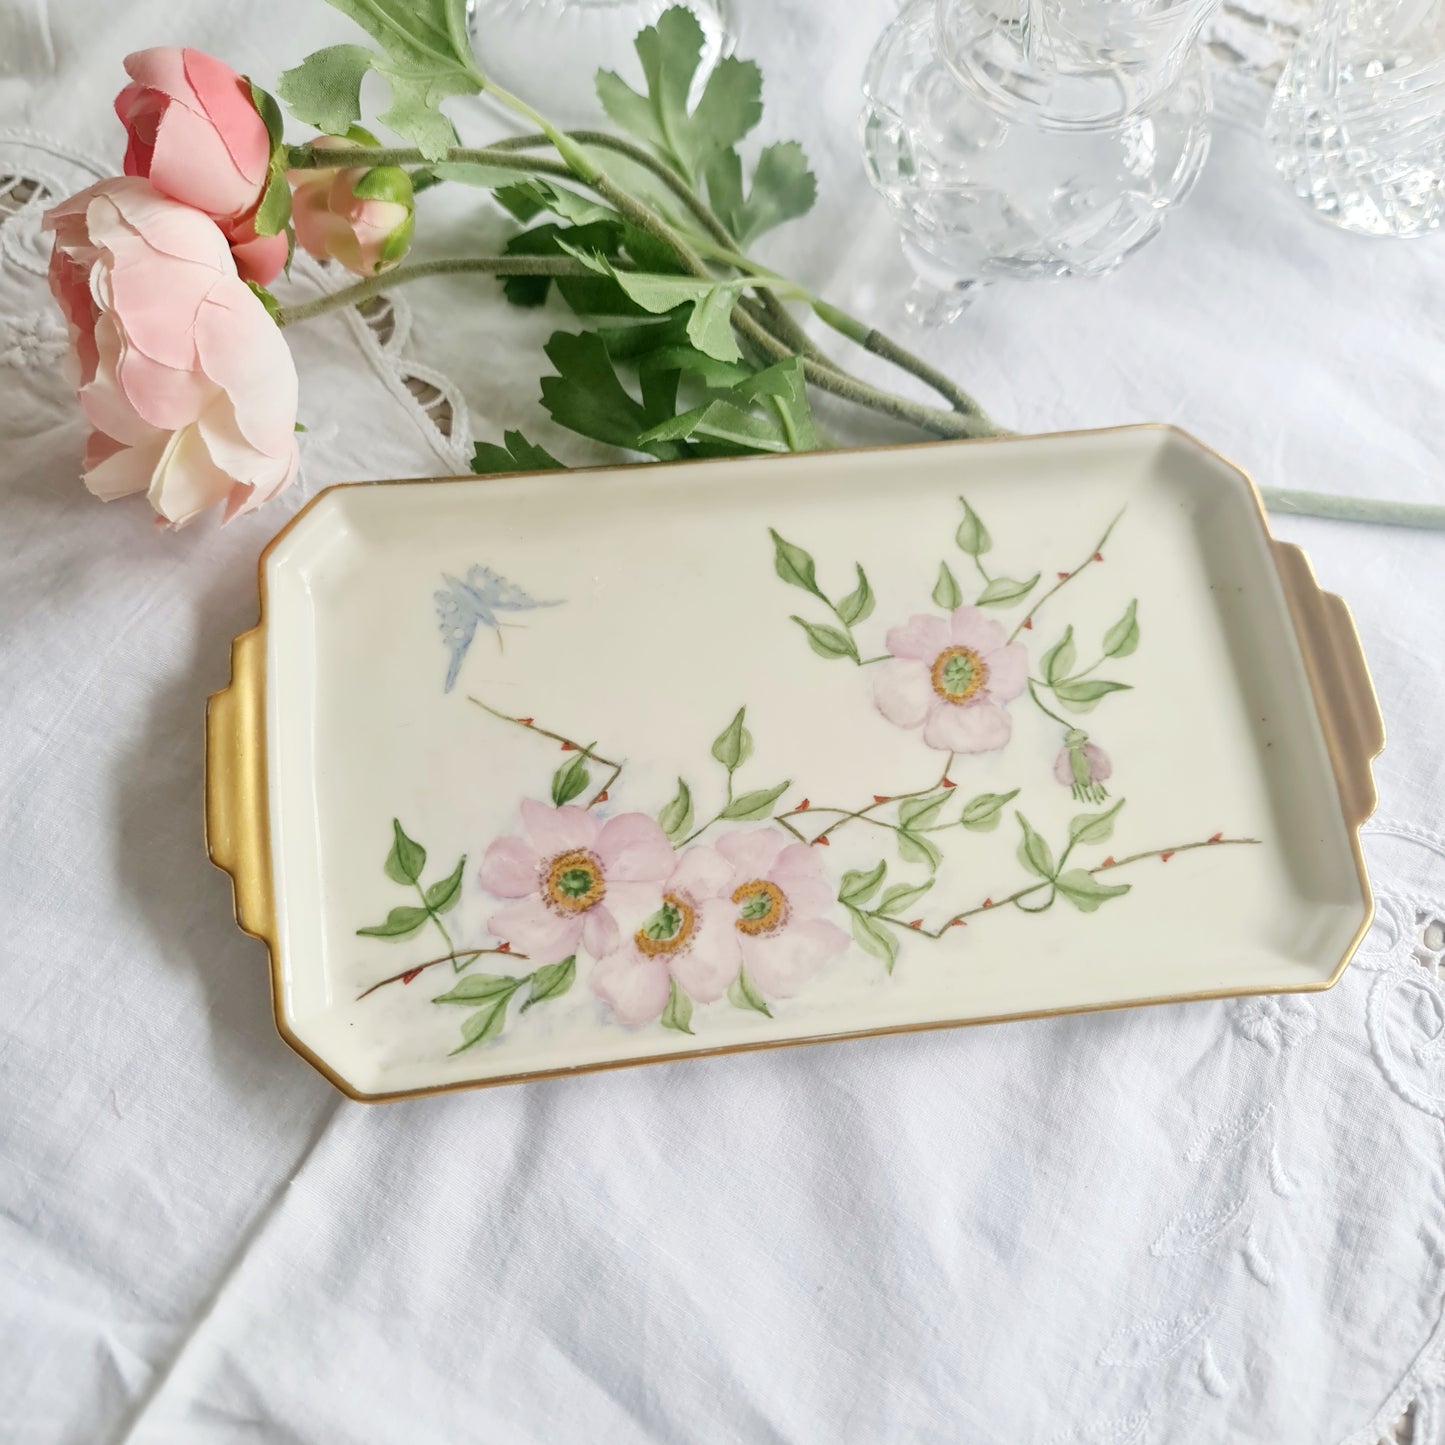 Epiag czechoslovakia vintage Hand painted serving tray